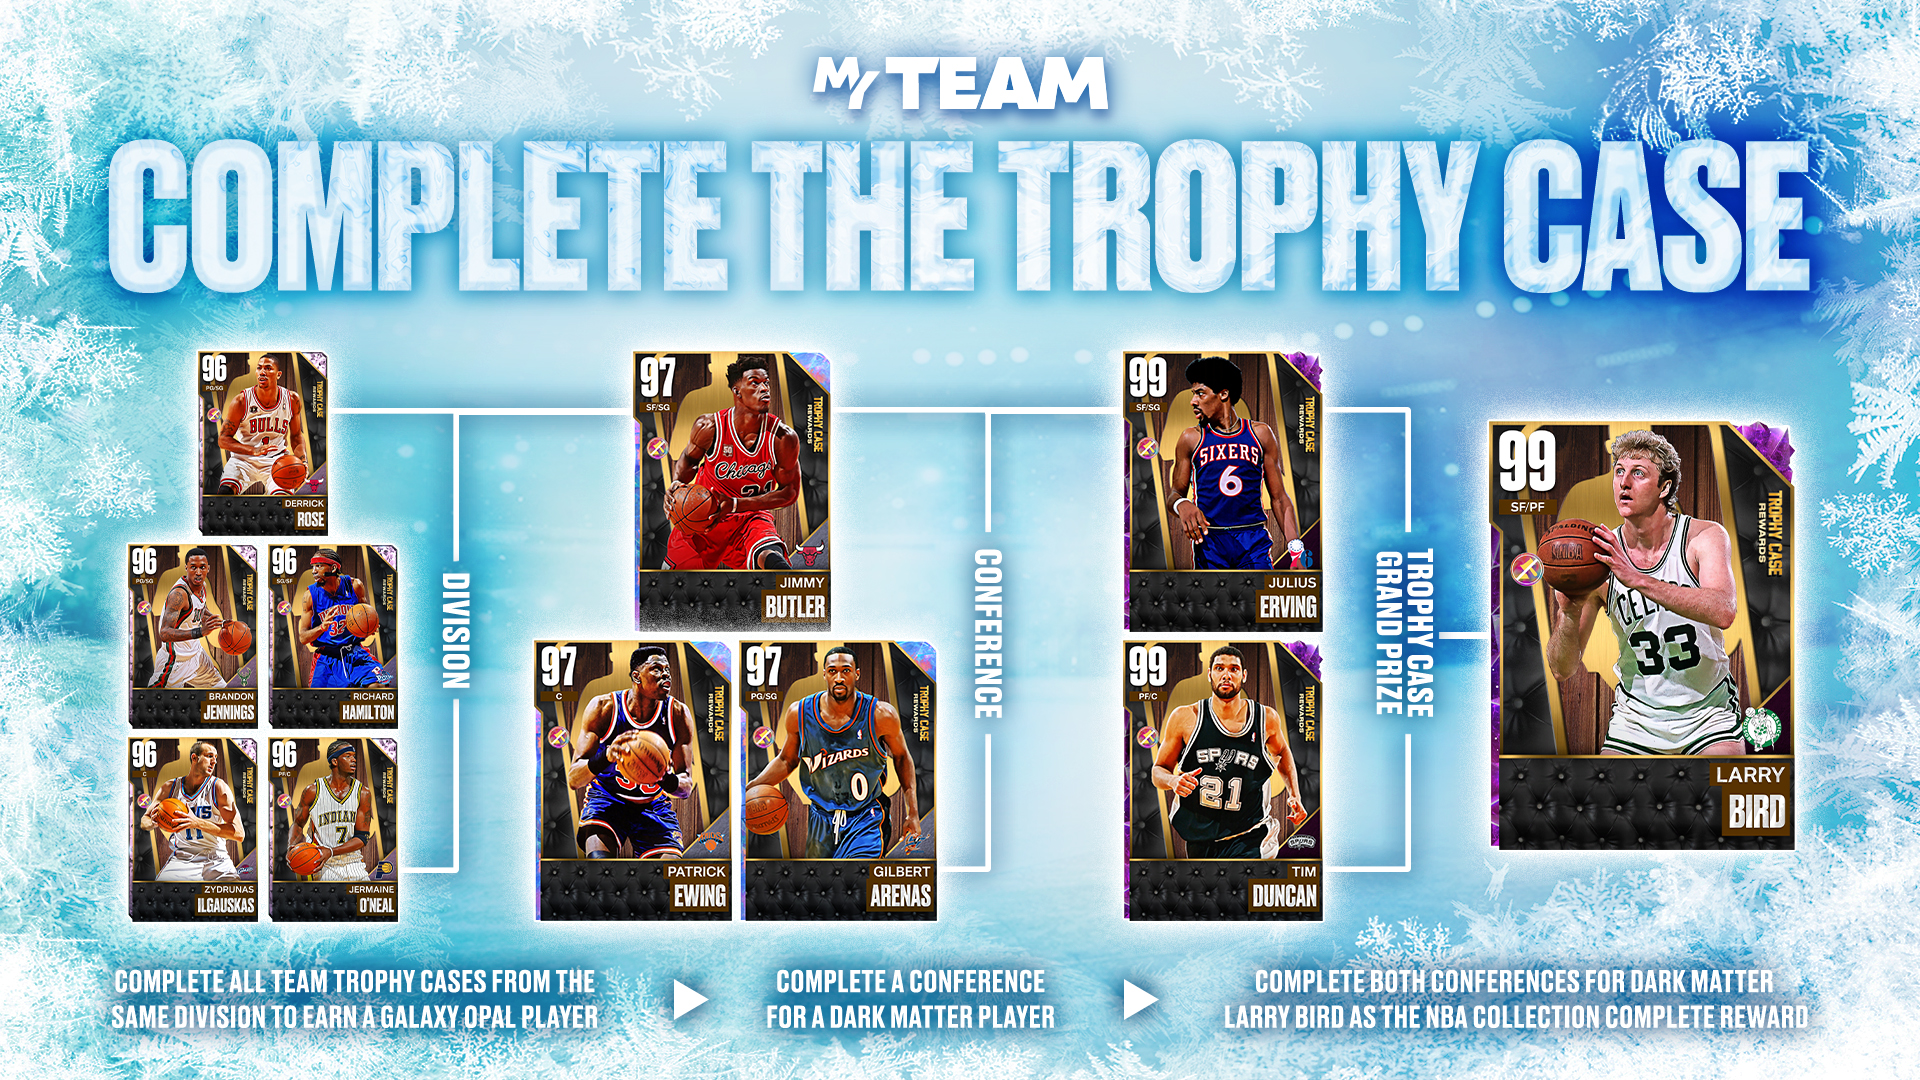 NBA23-MT S3W1-TROPHY CASE-FULL COLLECTION-SOCIAL-1920x1080